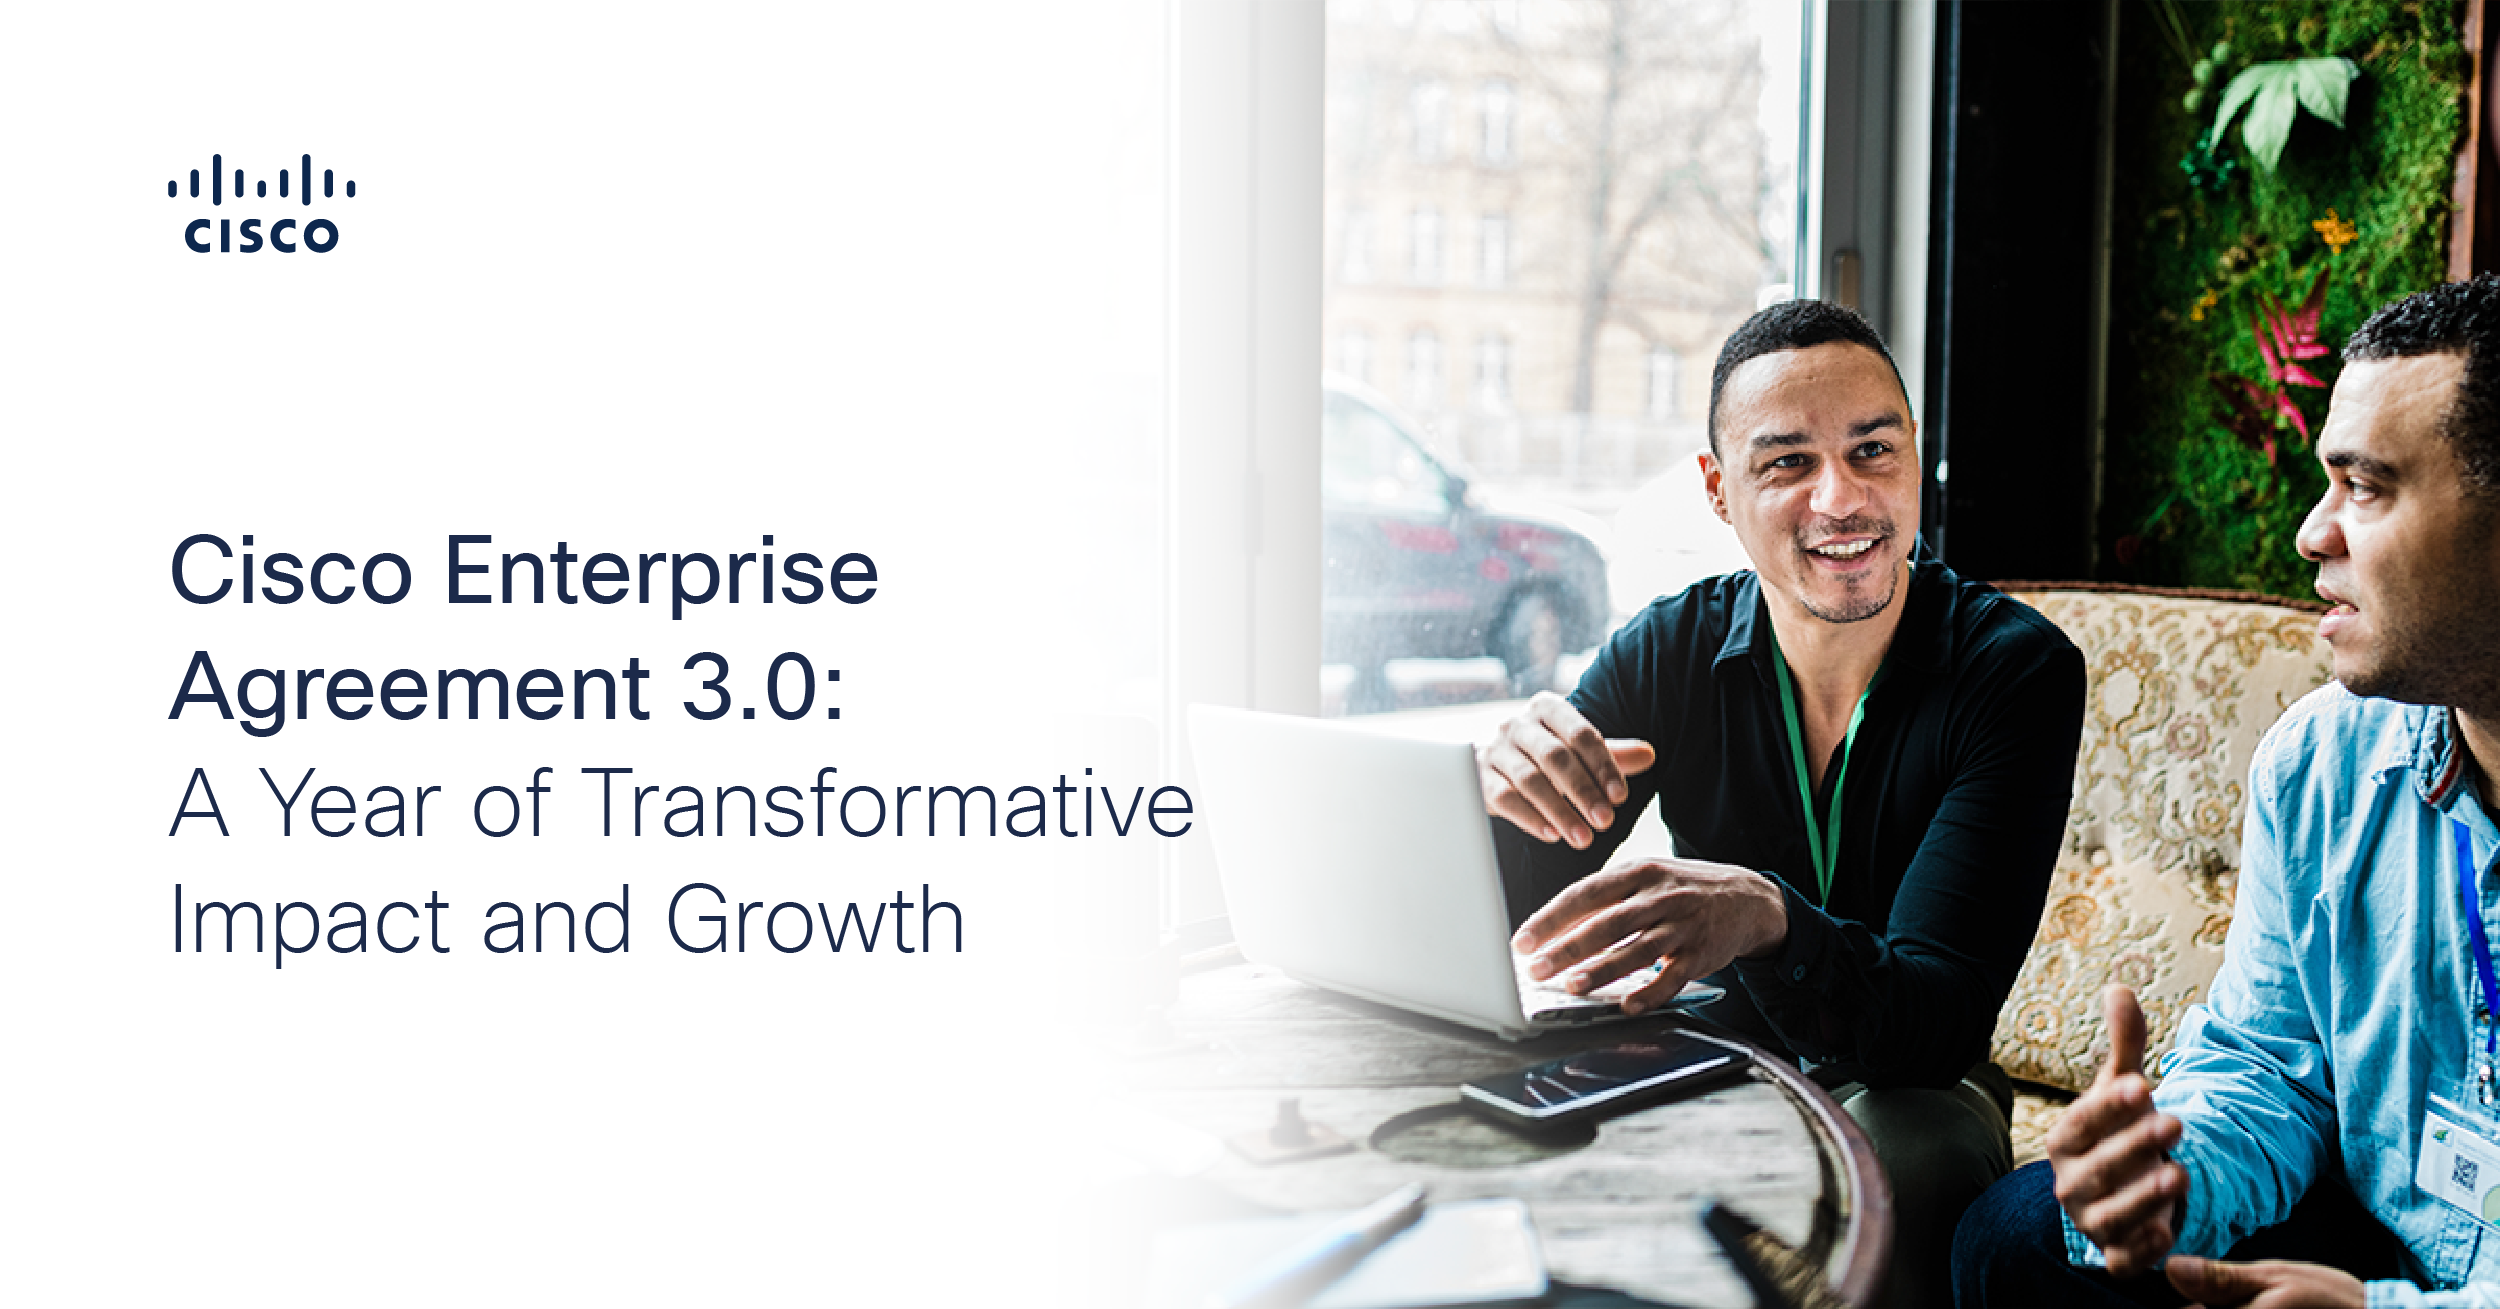 Cisco Enterprise Agreement 3.0: A Year of Transformative Impact and Growth